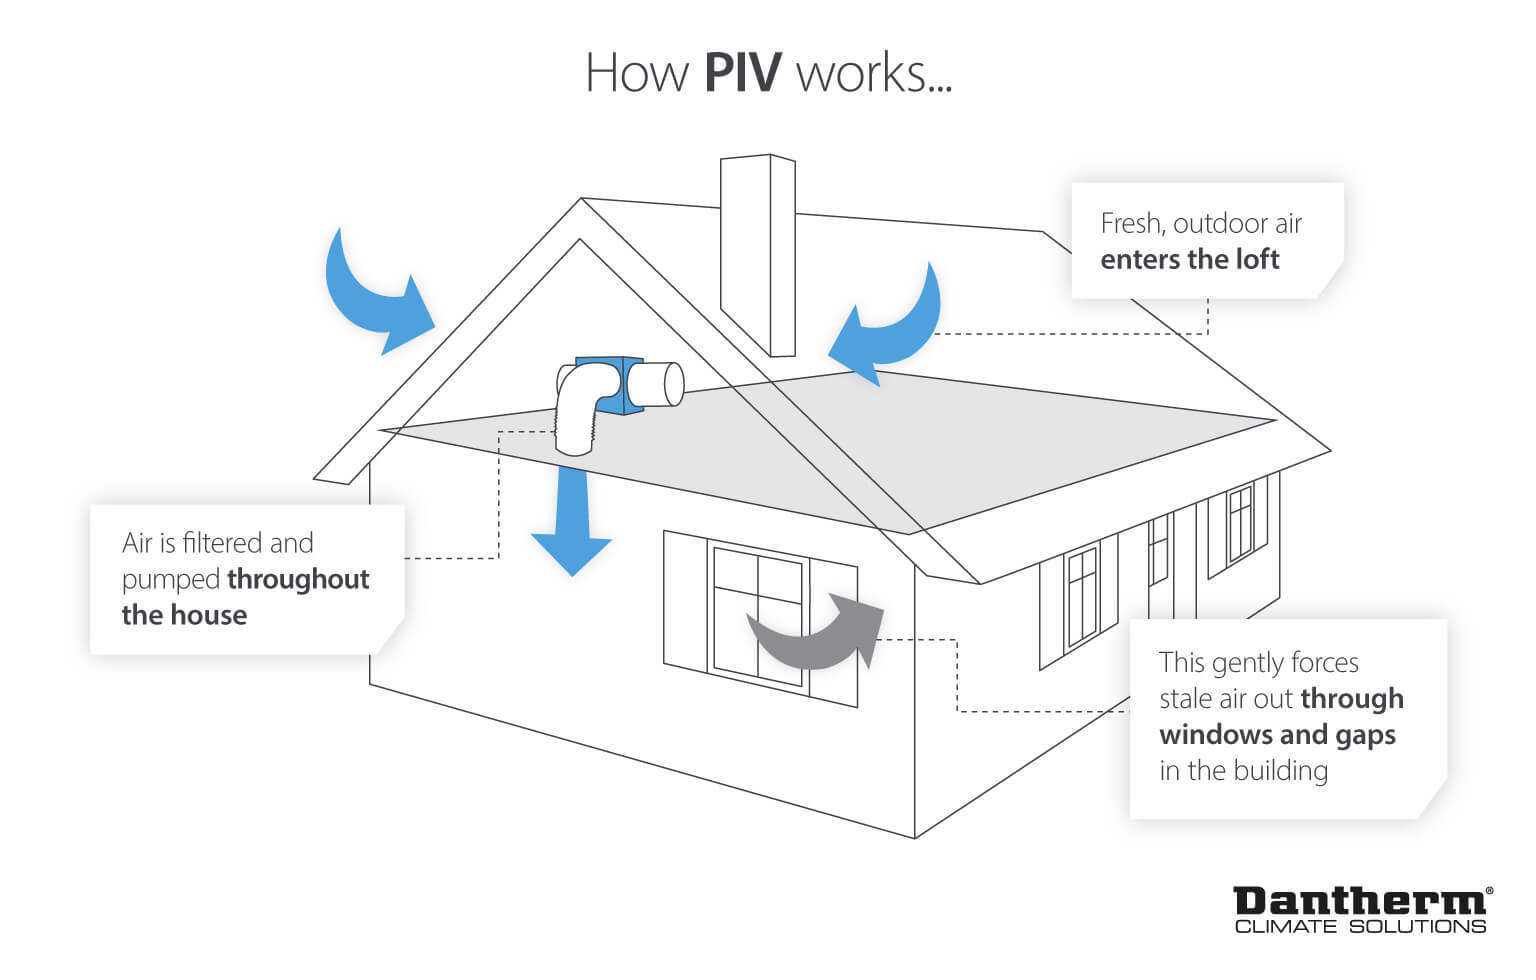 How PIV works for residential air ventilation - Dantherm infographic